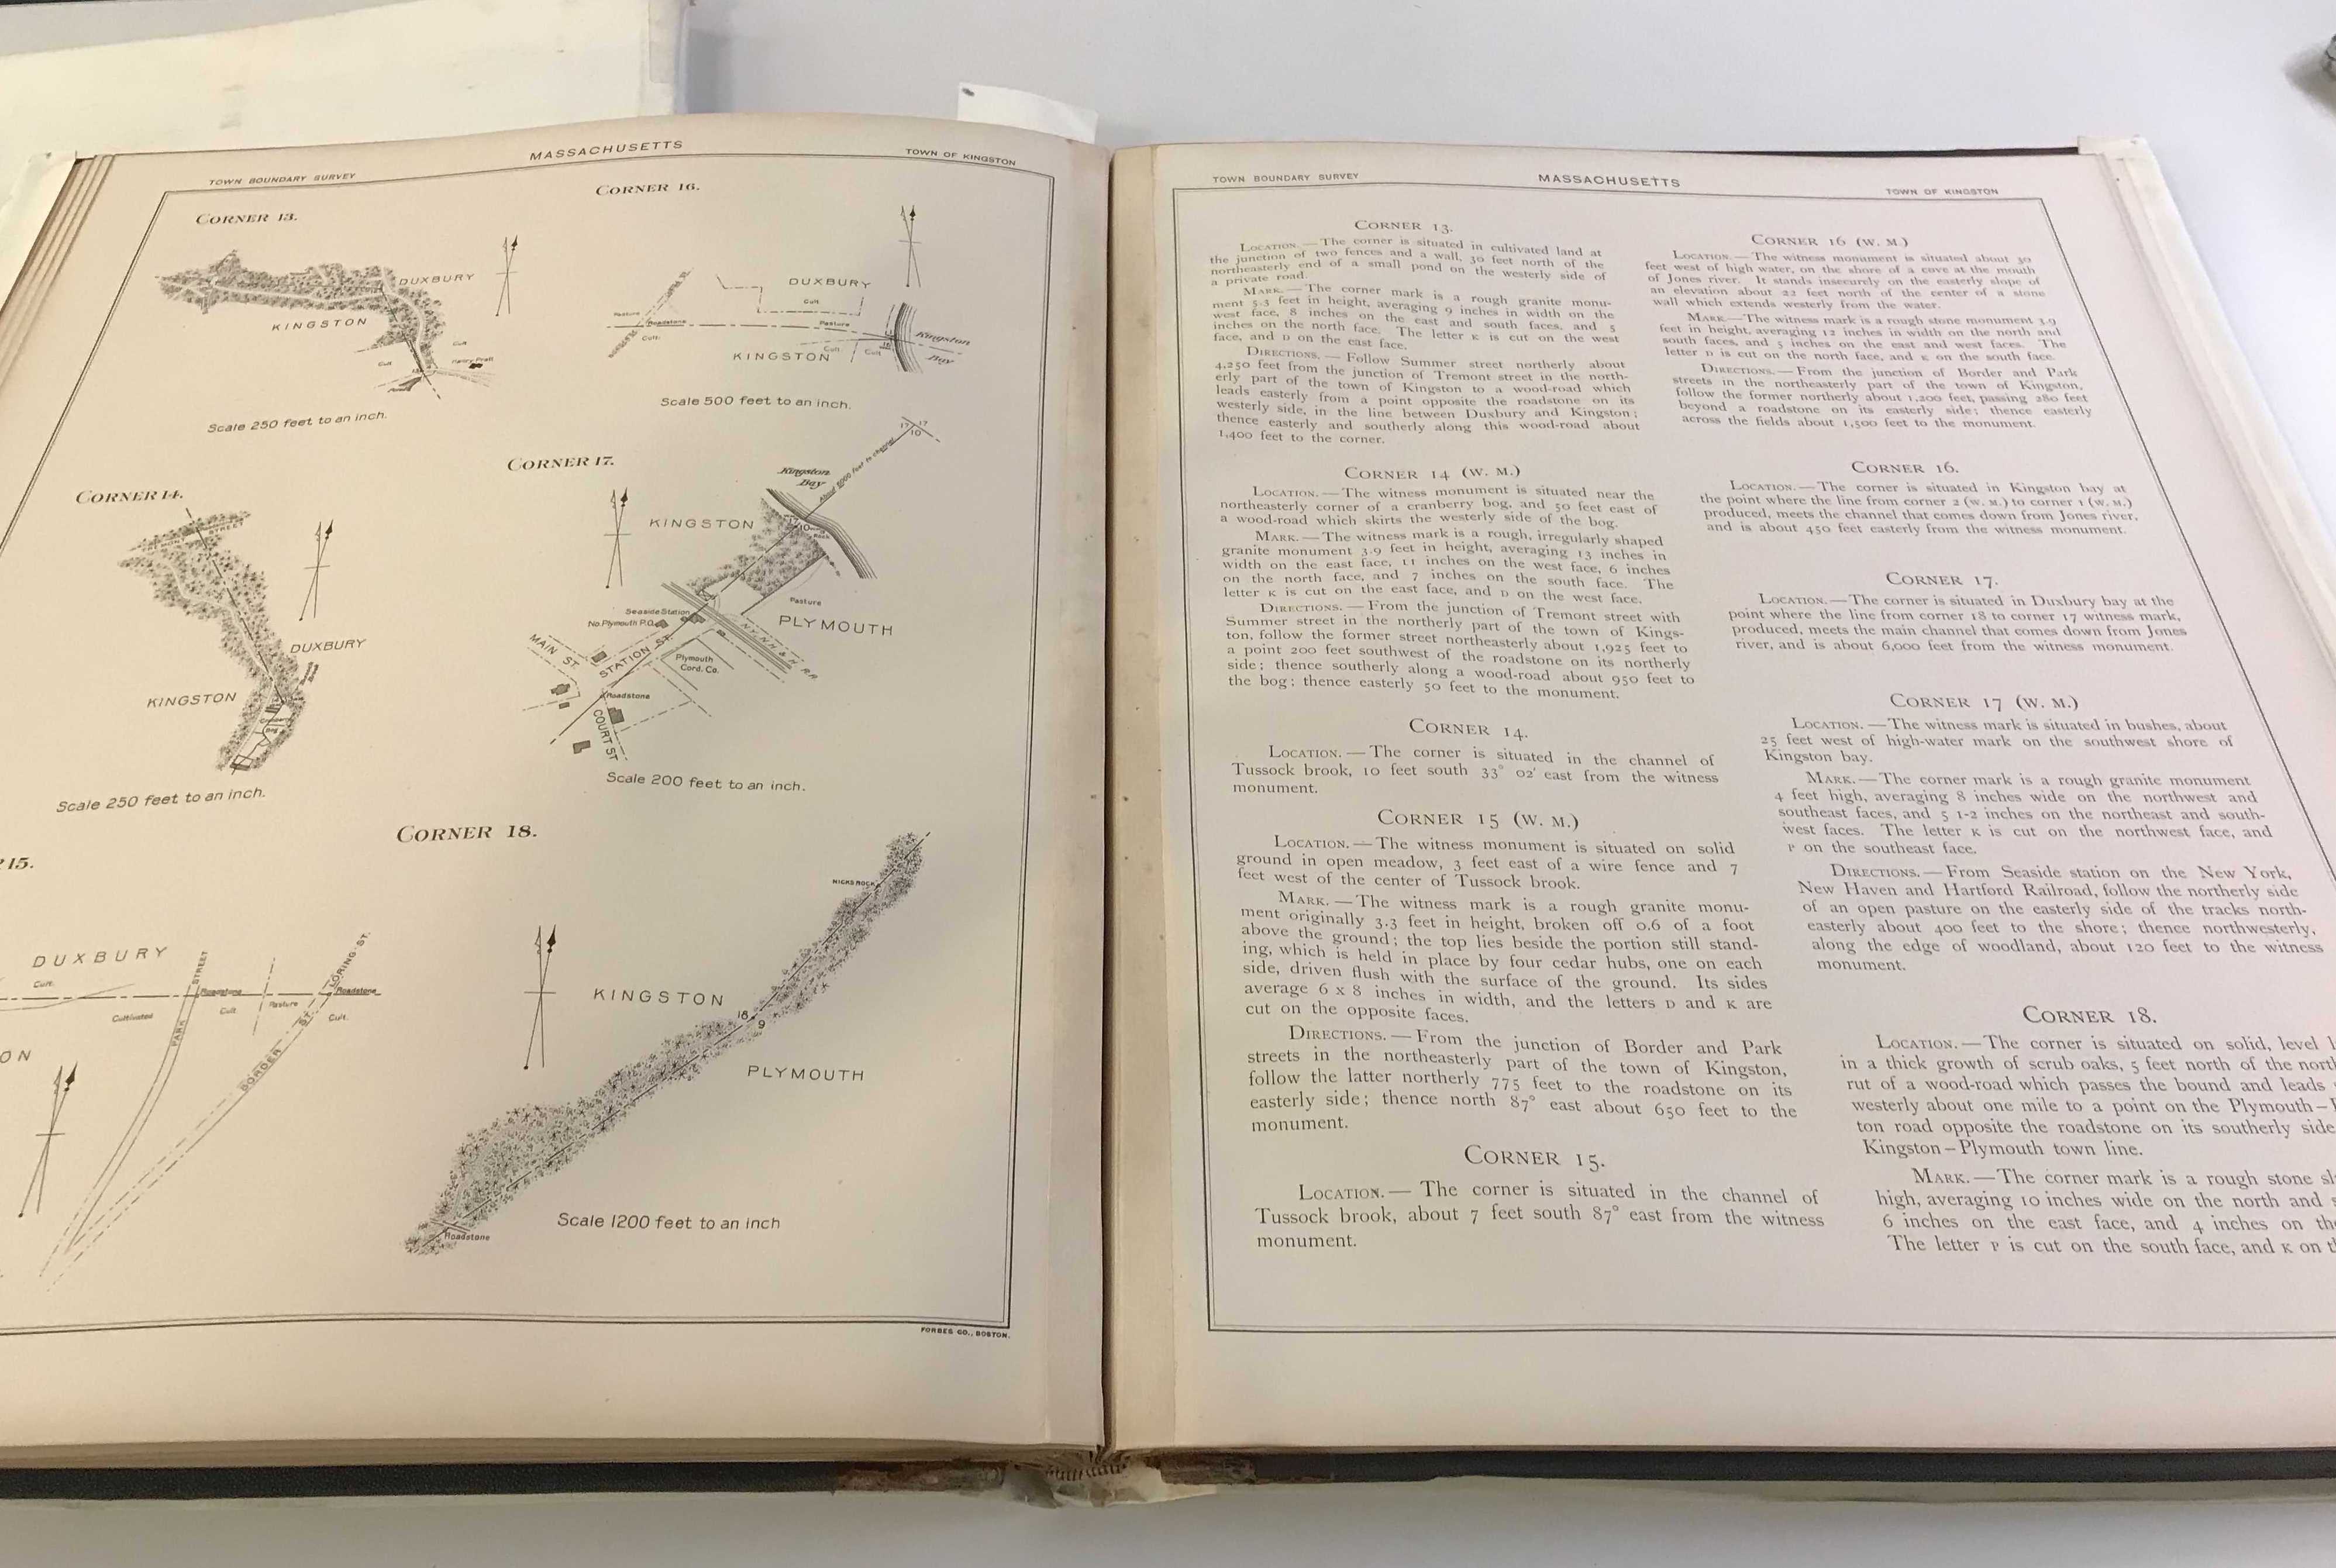 Atlas of the boundaries of the town of Kingston in the LMEC collections